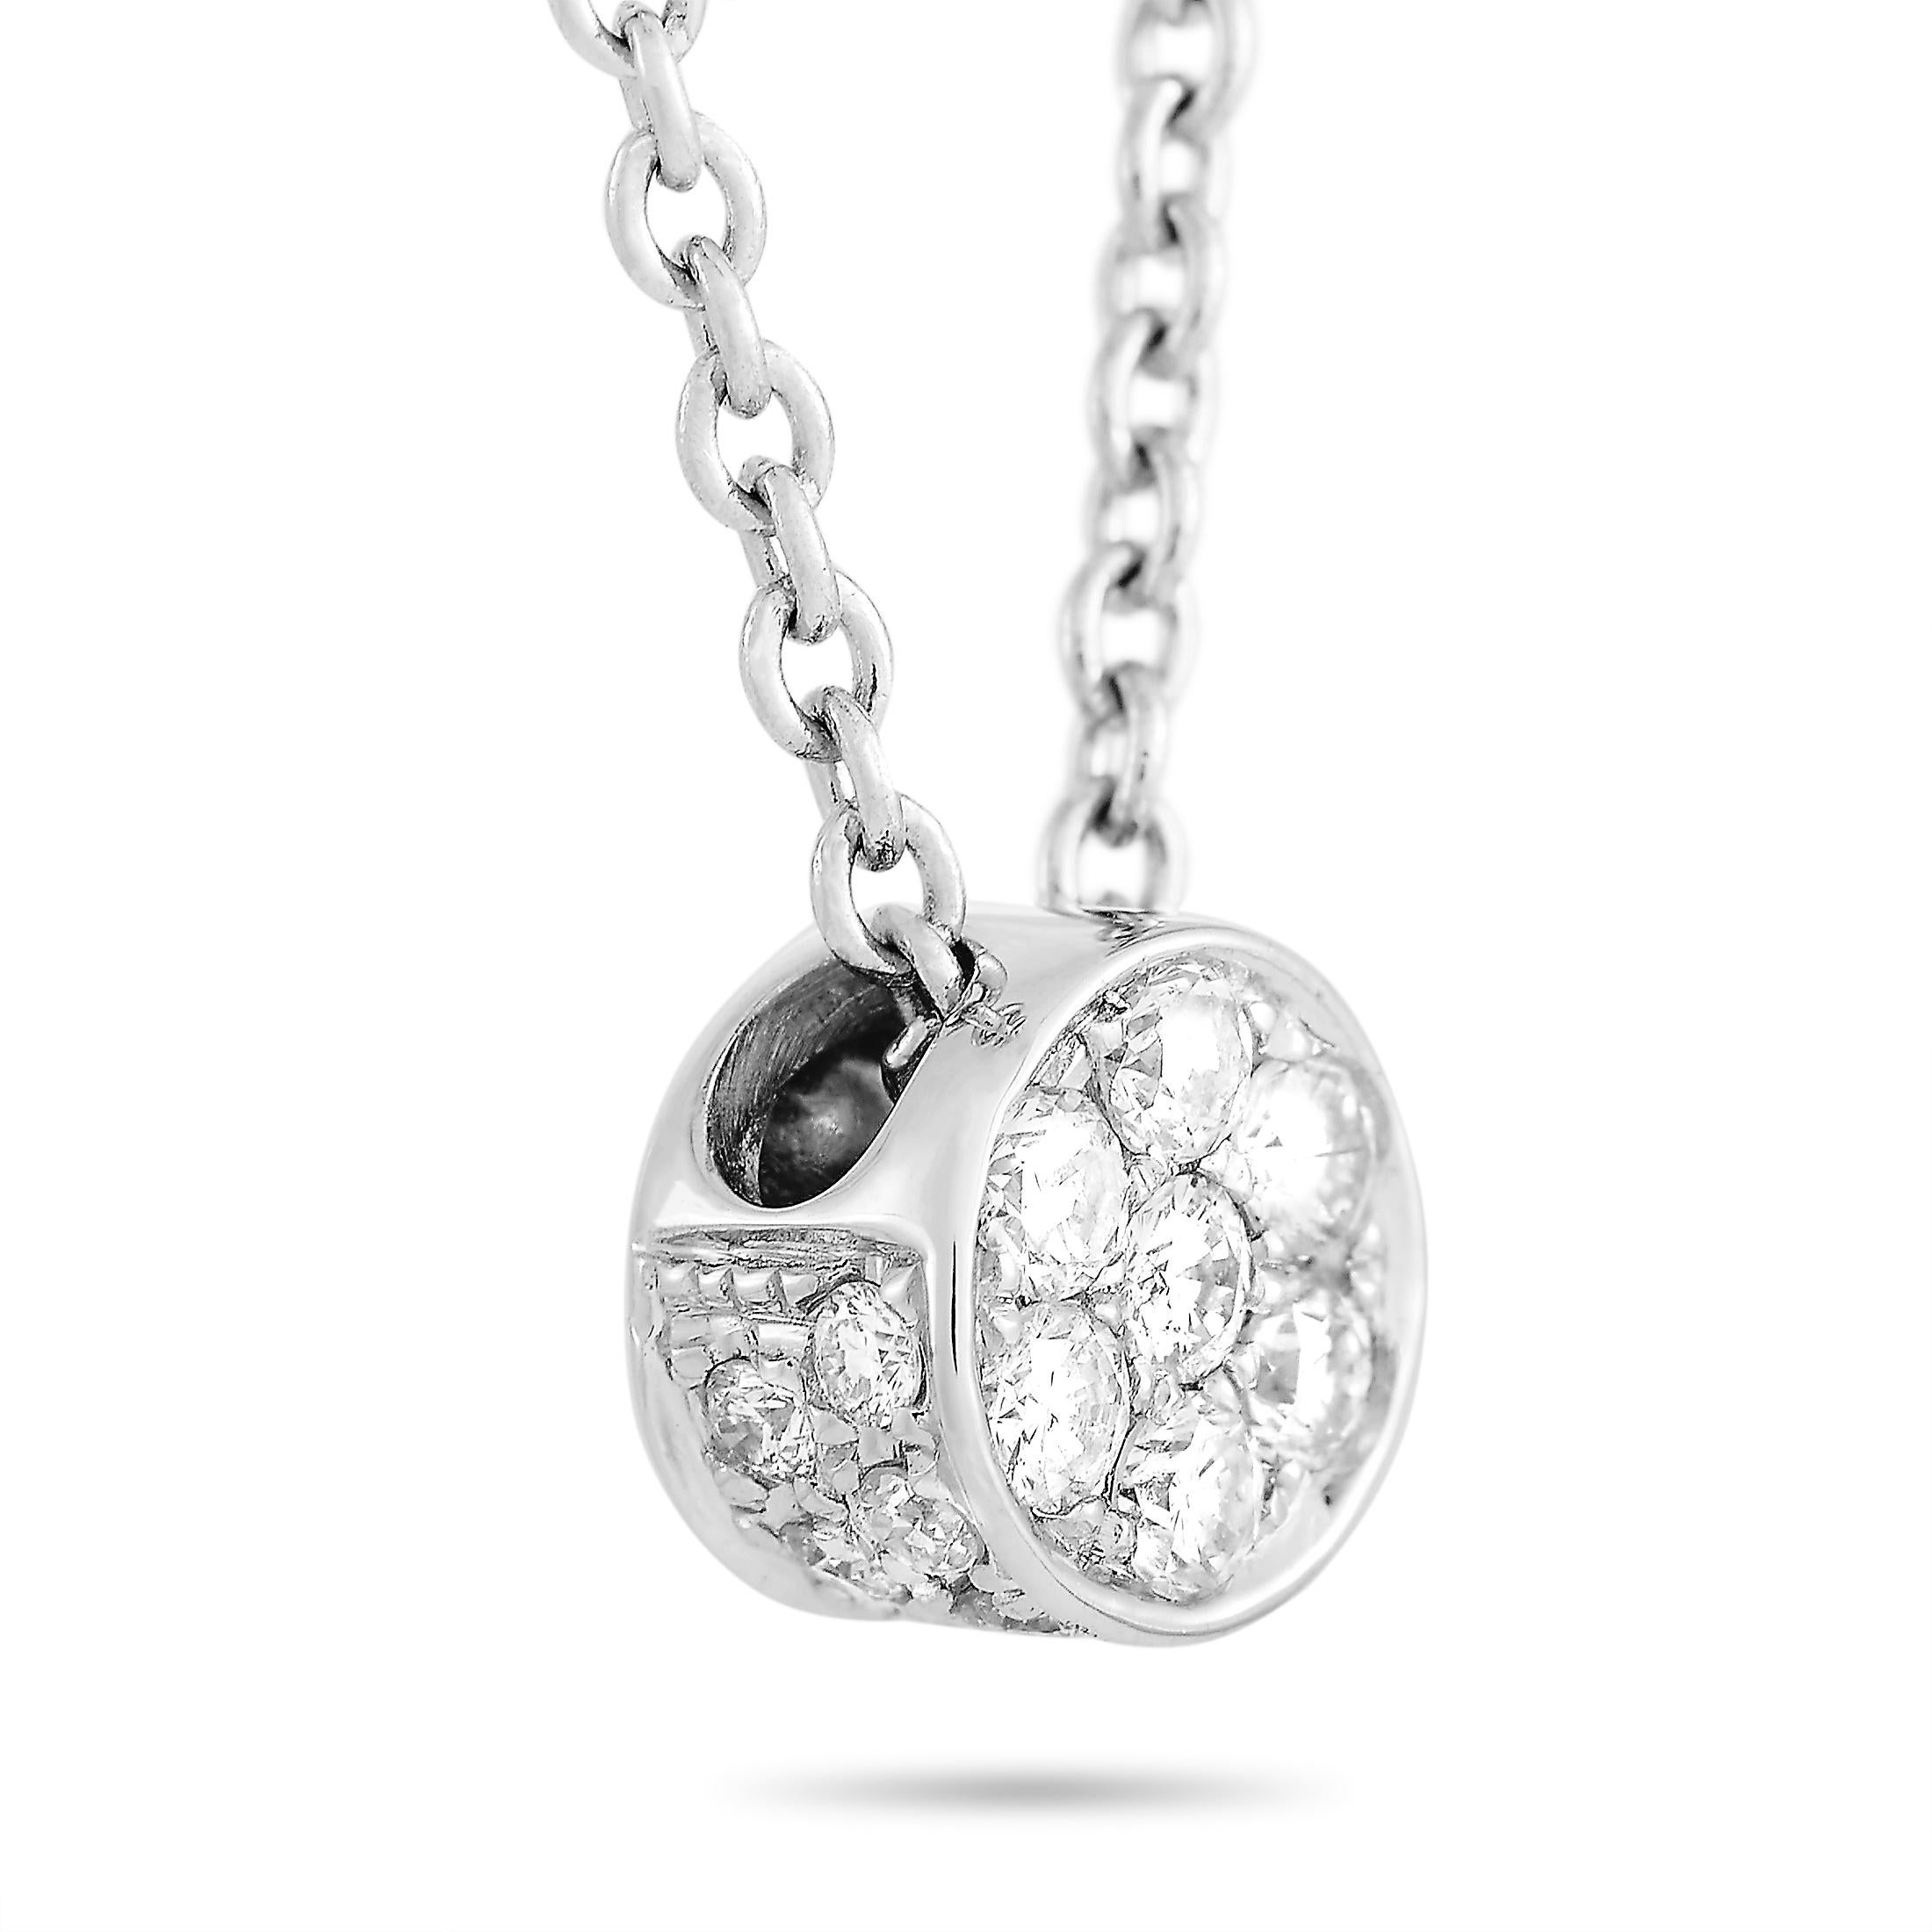 This LB Exclusive necklace is made of 18K white gold and embellished with diamonds that amount to 0.20 carats. The necklace weighs 3.1 grams and boasts a 16” chain and a pendant that measures 0.25” in length and 0.25” in width.
 
 Offered in brand